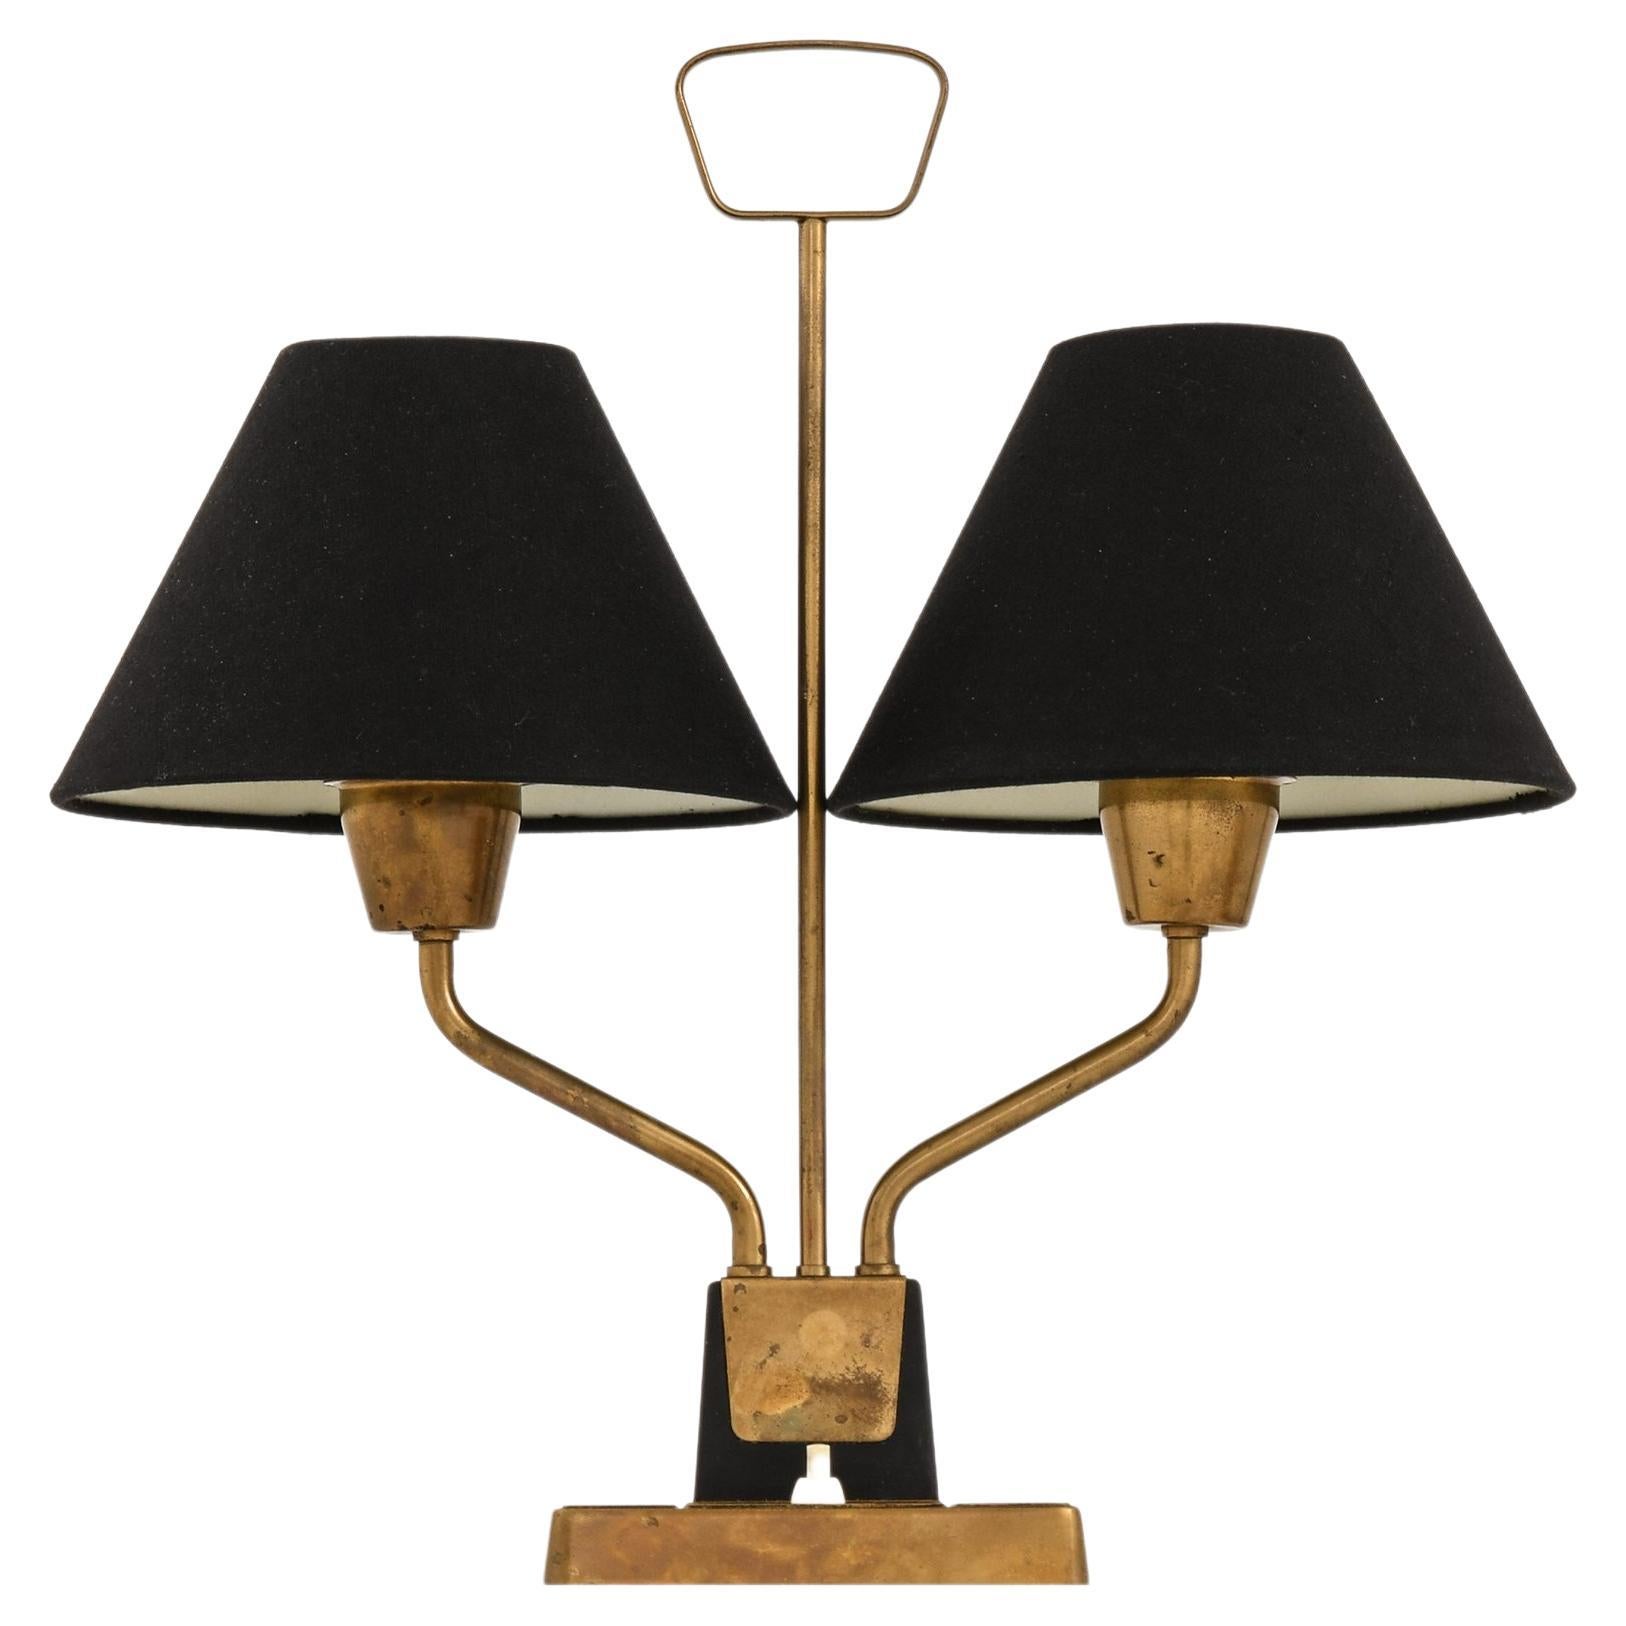 Table Lamp in Brass and Black Fabric Lamp Shades by Sonja Katzin, 1950's ASEA